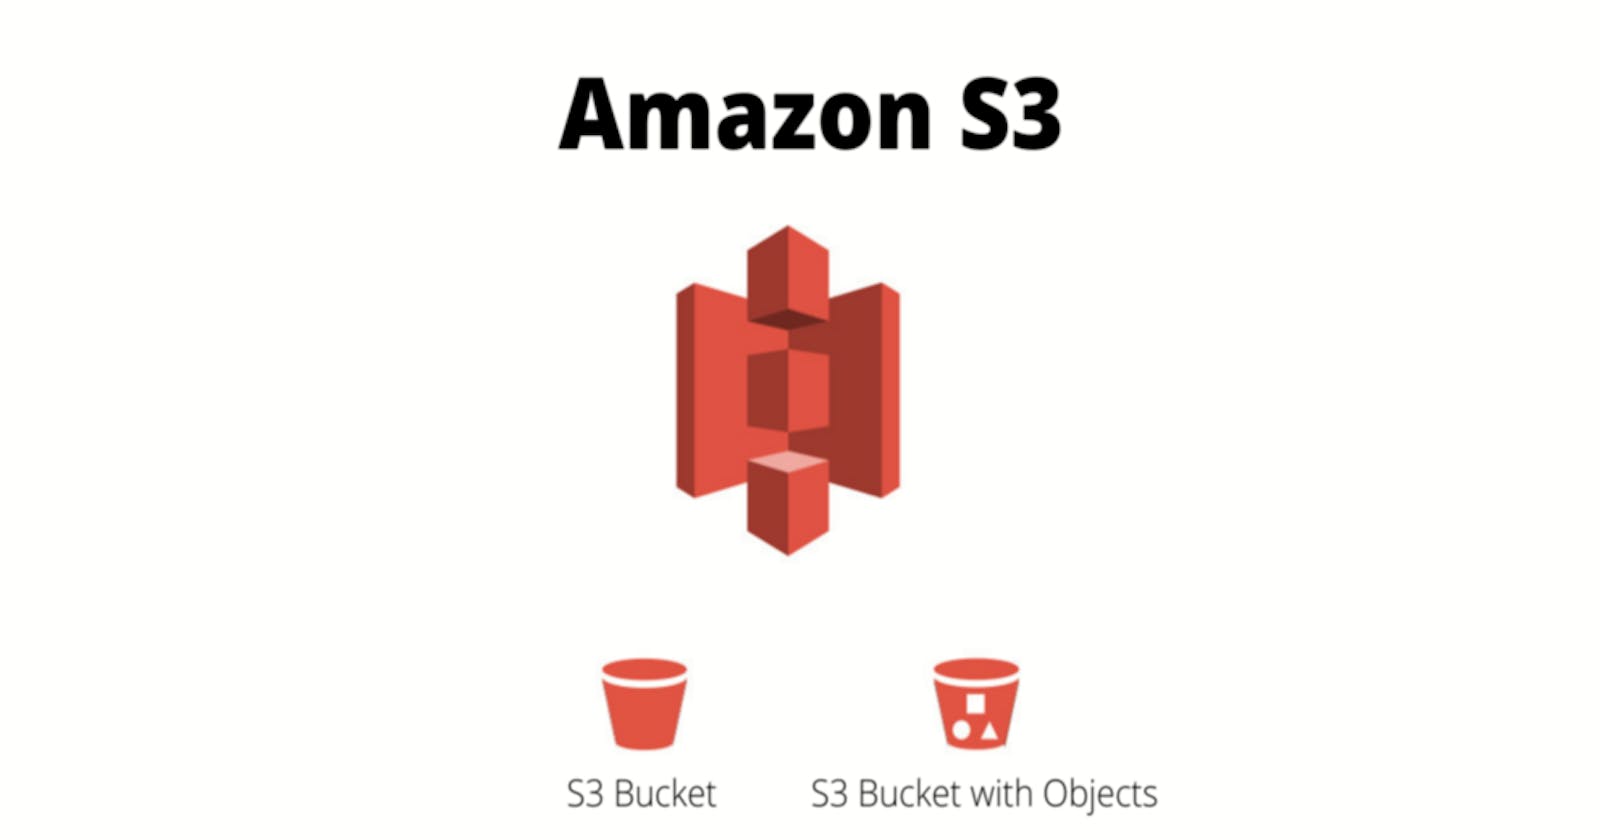 Creating an Amazon S3 Bucket for storing media and static files for your website